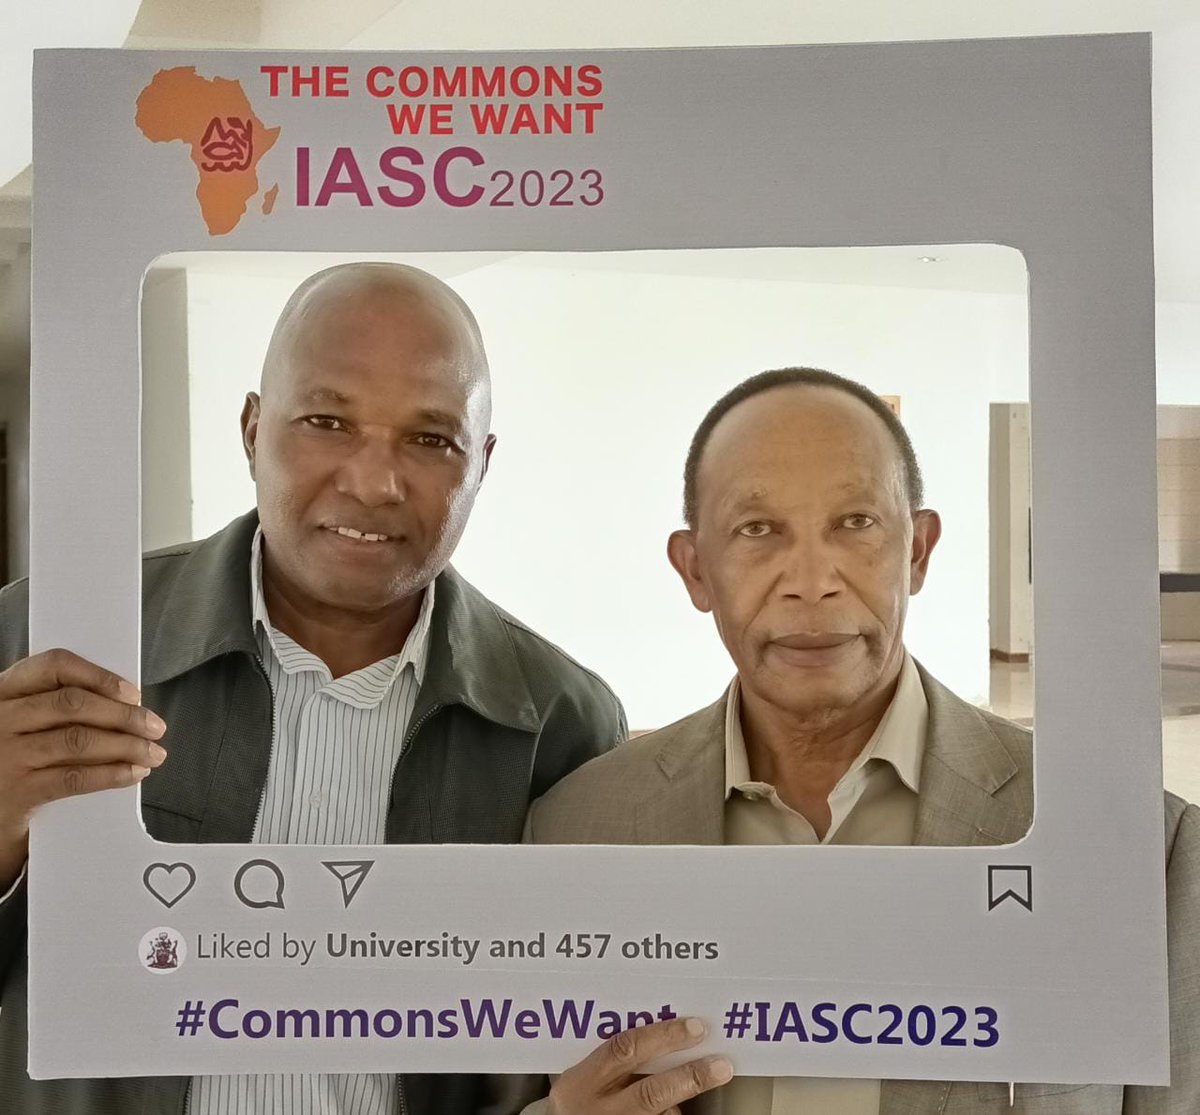 Set for the 19th Biennial IASC Conference, 19th to 24th June, 2023 at @uonbi 
@unibern @cetradKe @SwissTPH @iasc_commons
@swissafrica2
#IASC2023 #Commonswewant